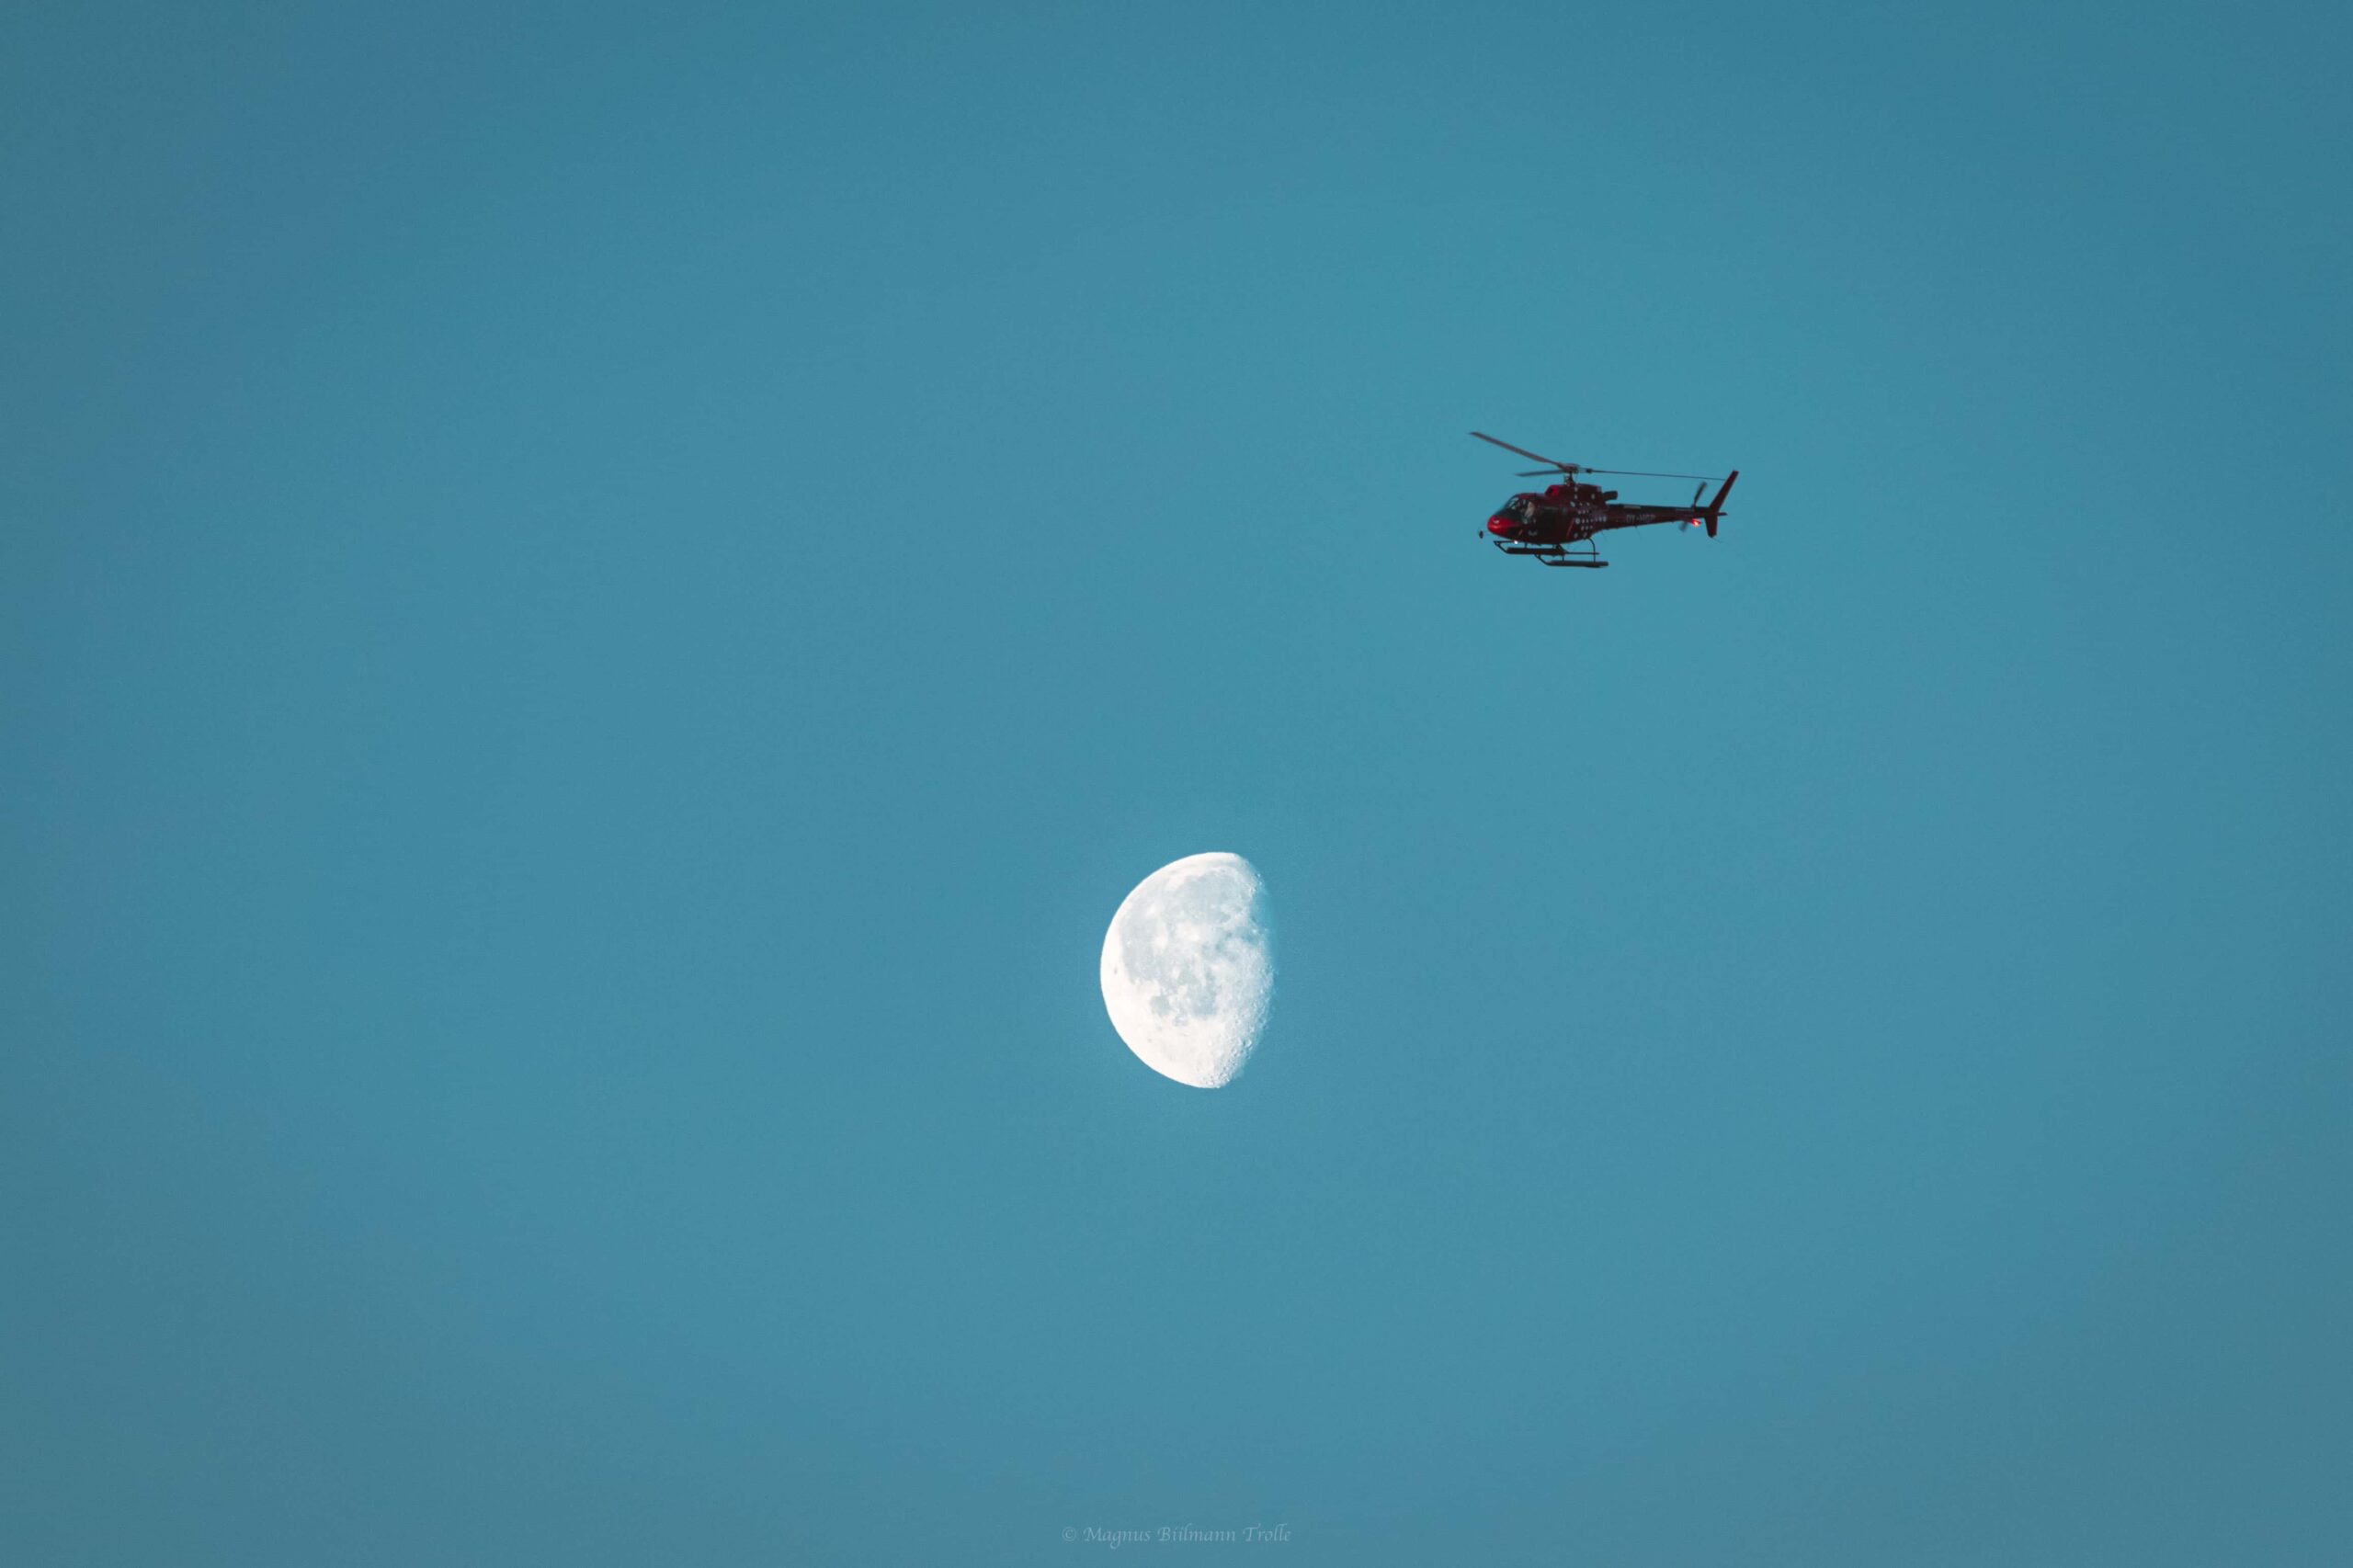 santa-claus-in-red-helicopter-in-front-of-the-moon